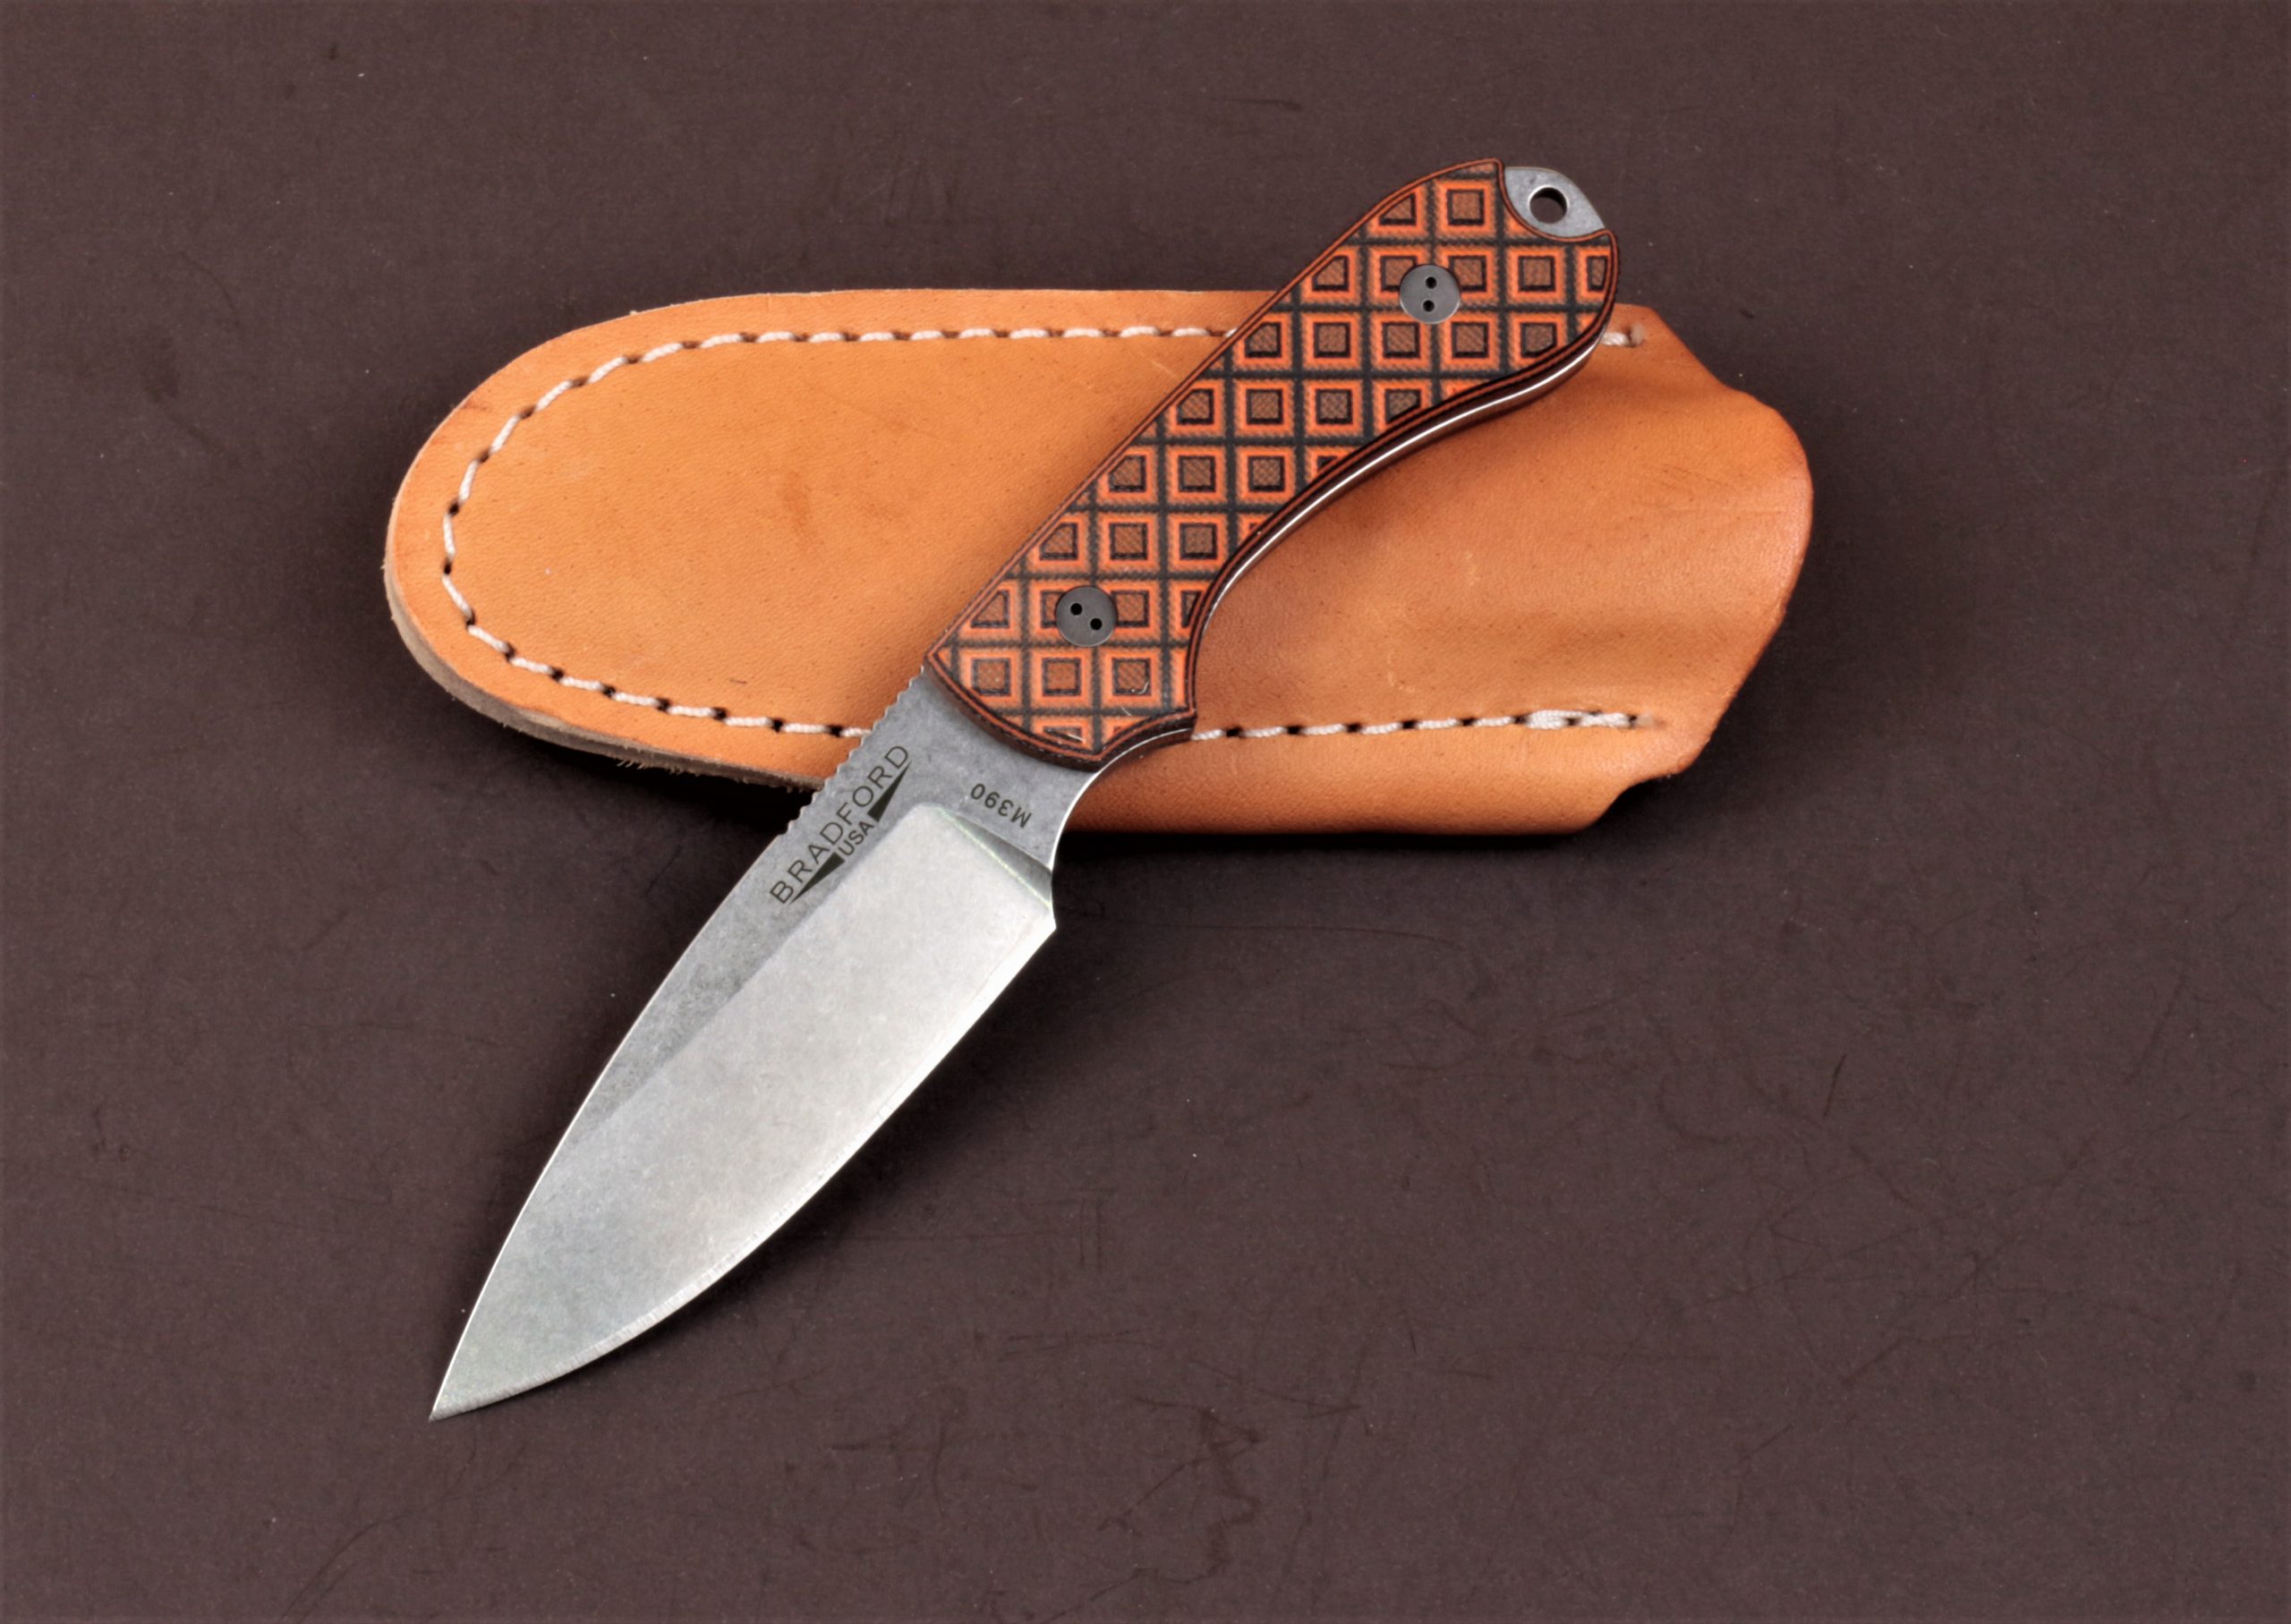 Bradford Guardian3 a Top EDC Fixed Blade - Knives Illustrated